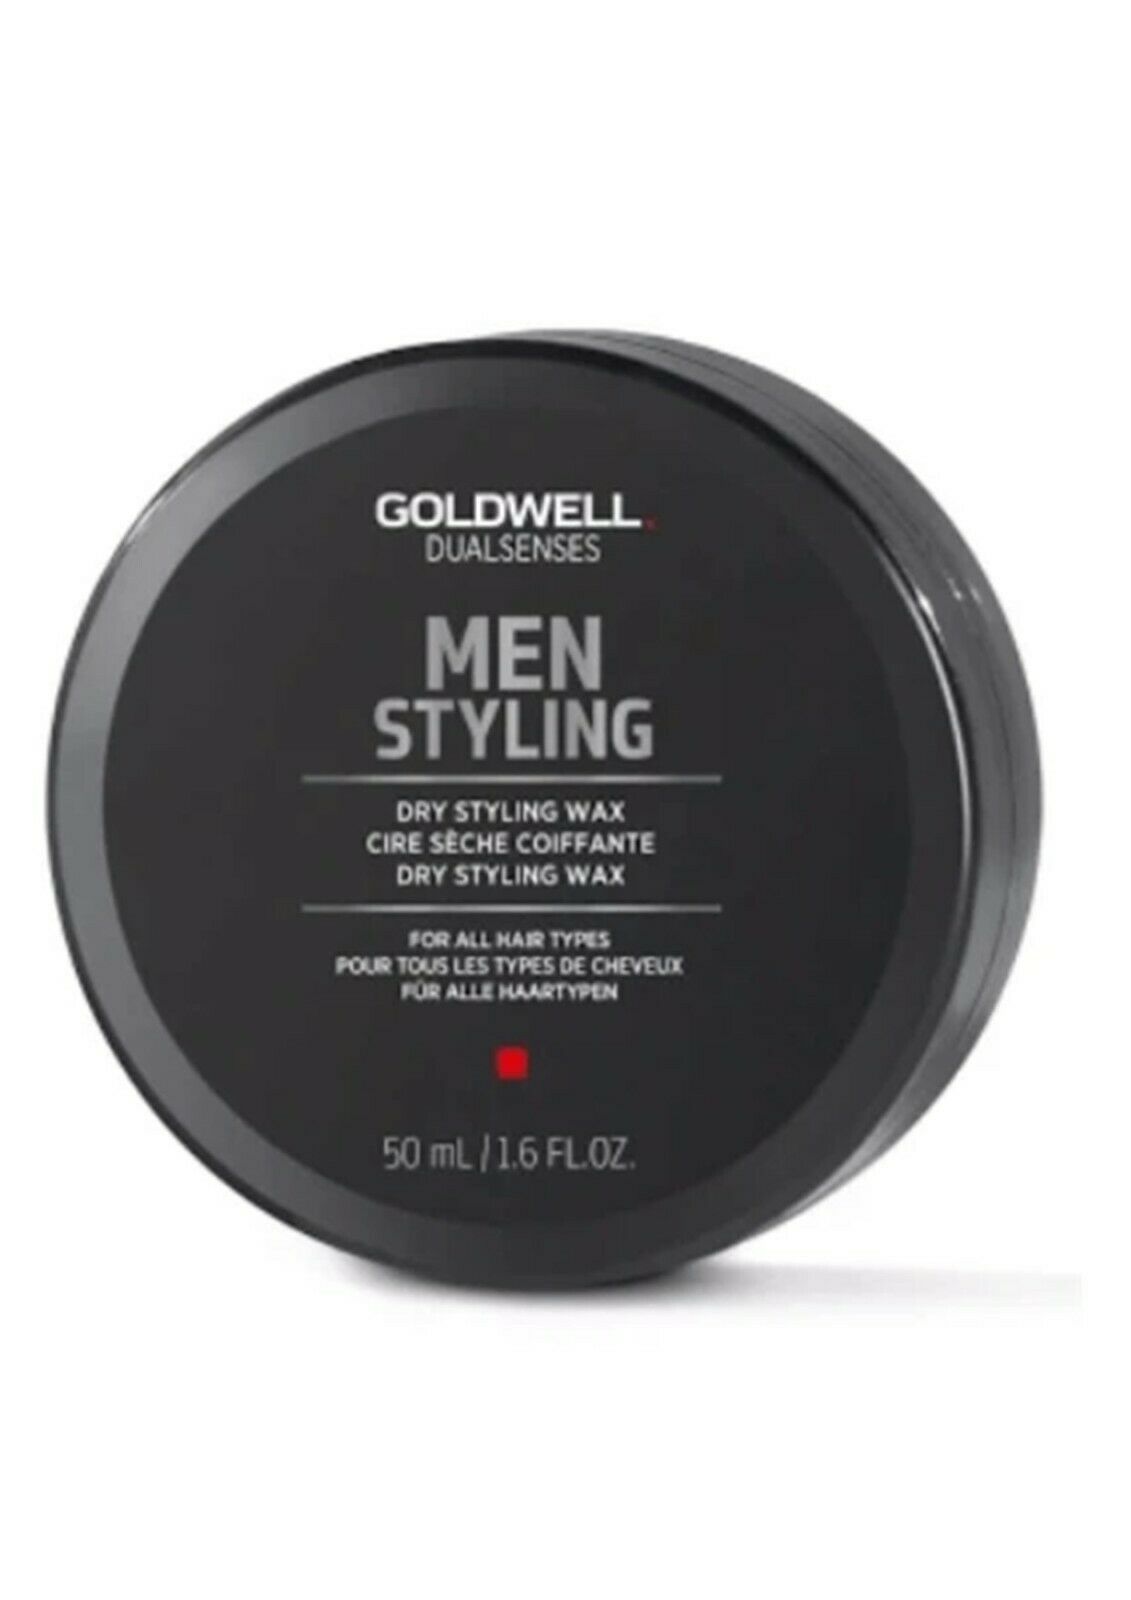 iaahhaircare,Goldwell Dual Senses Men Styling Dry Styling Wax (For All Hair Types) 50ml Mens,Styling Products,Goldwell